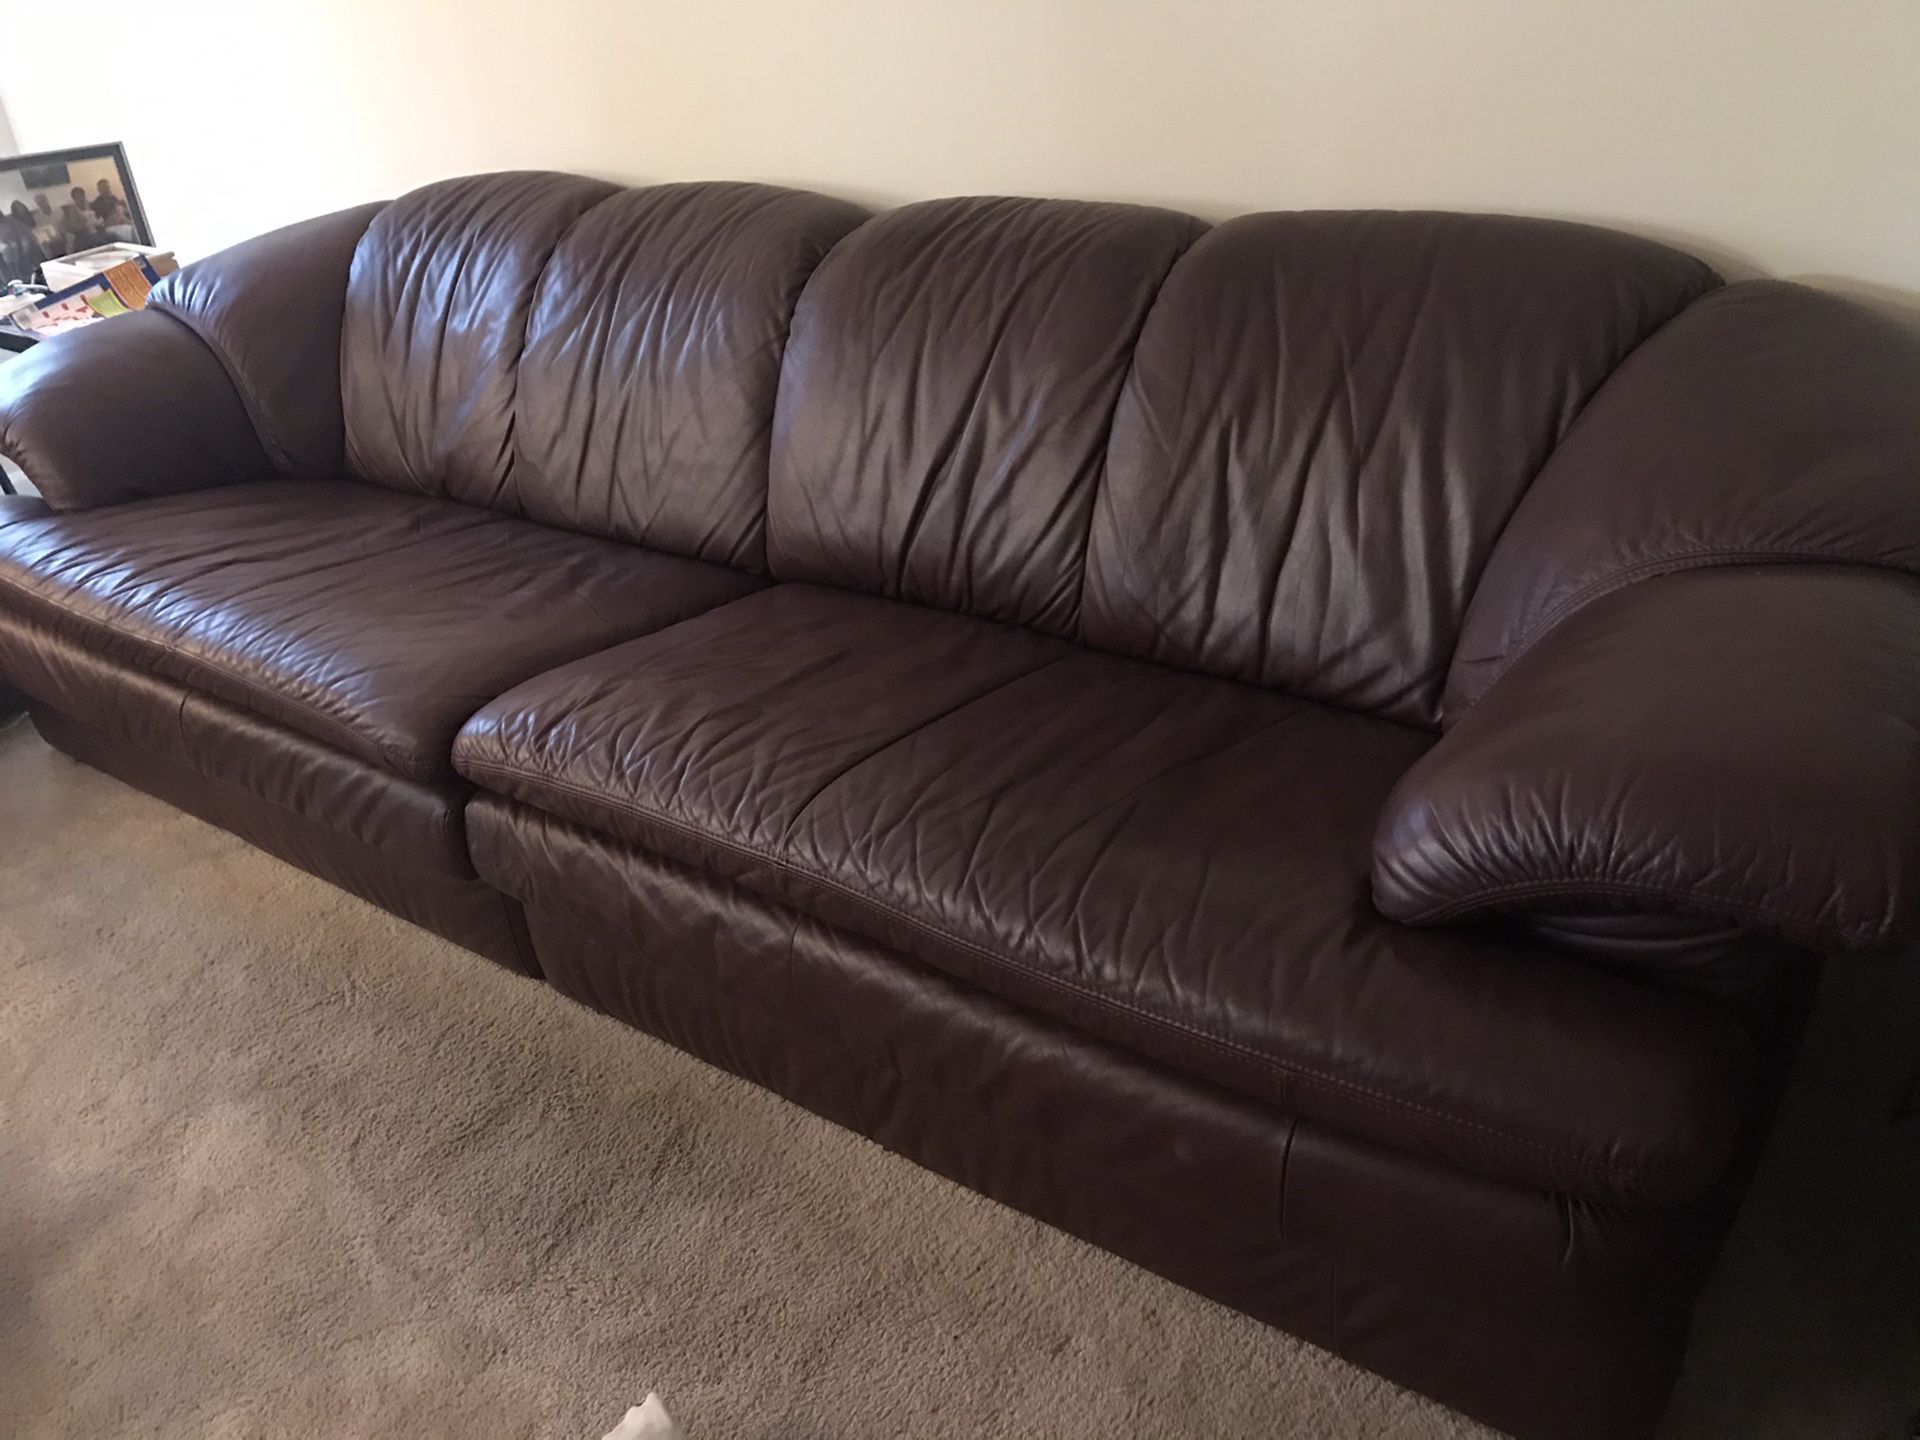 Italian leather couch